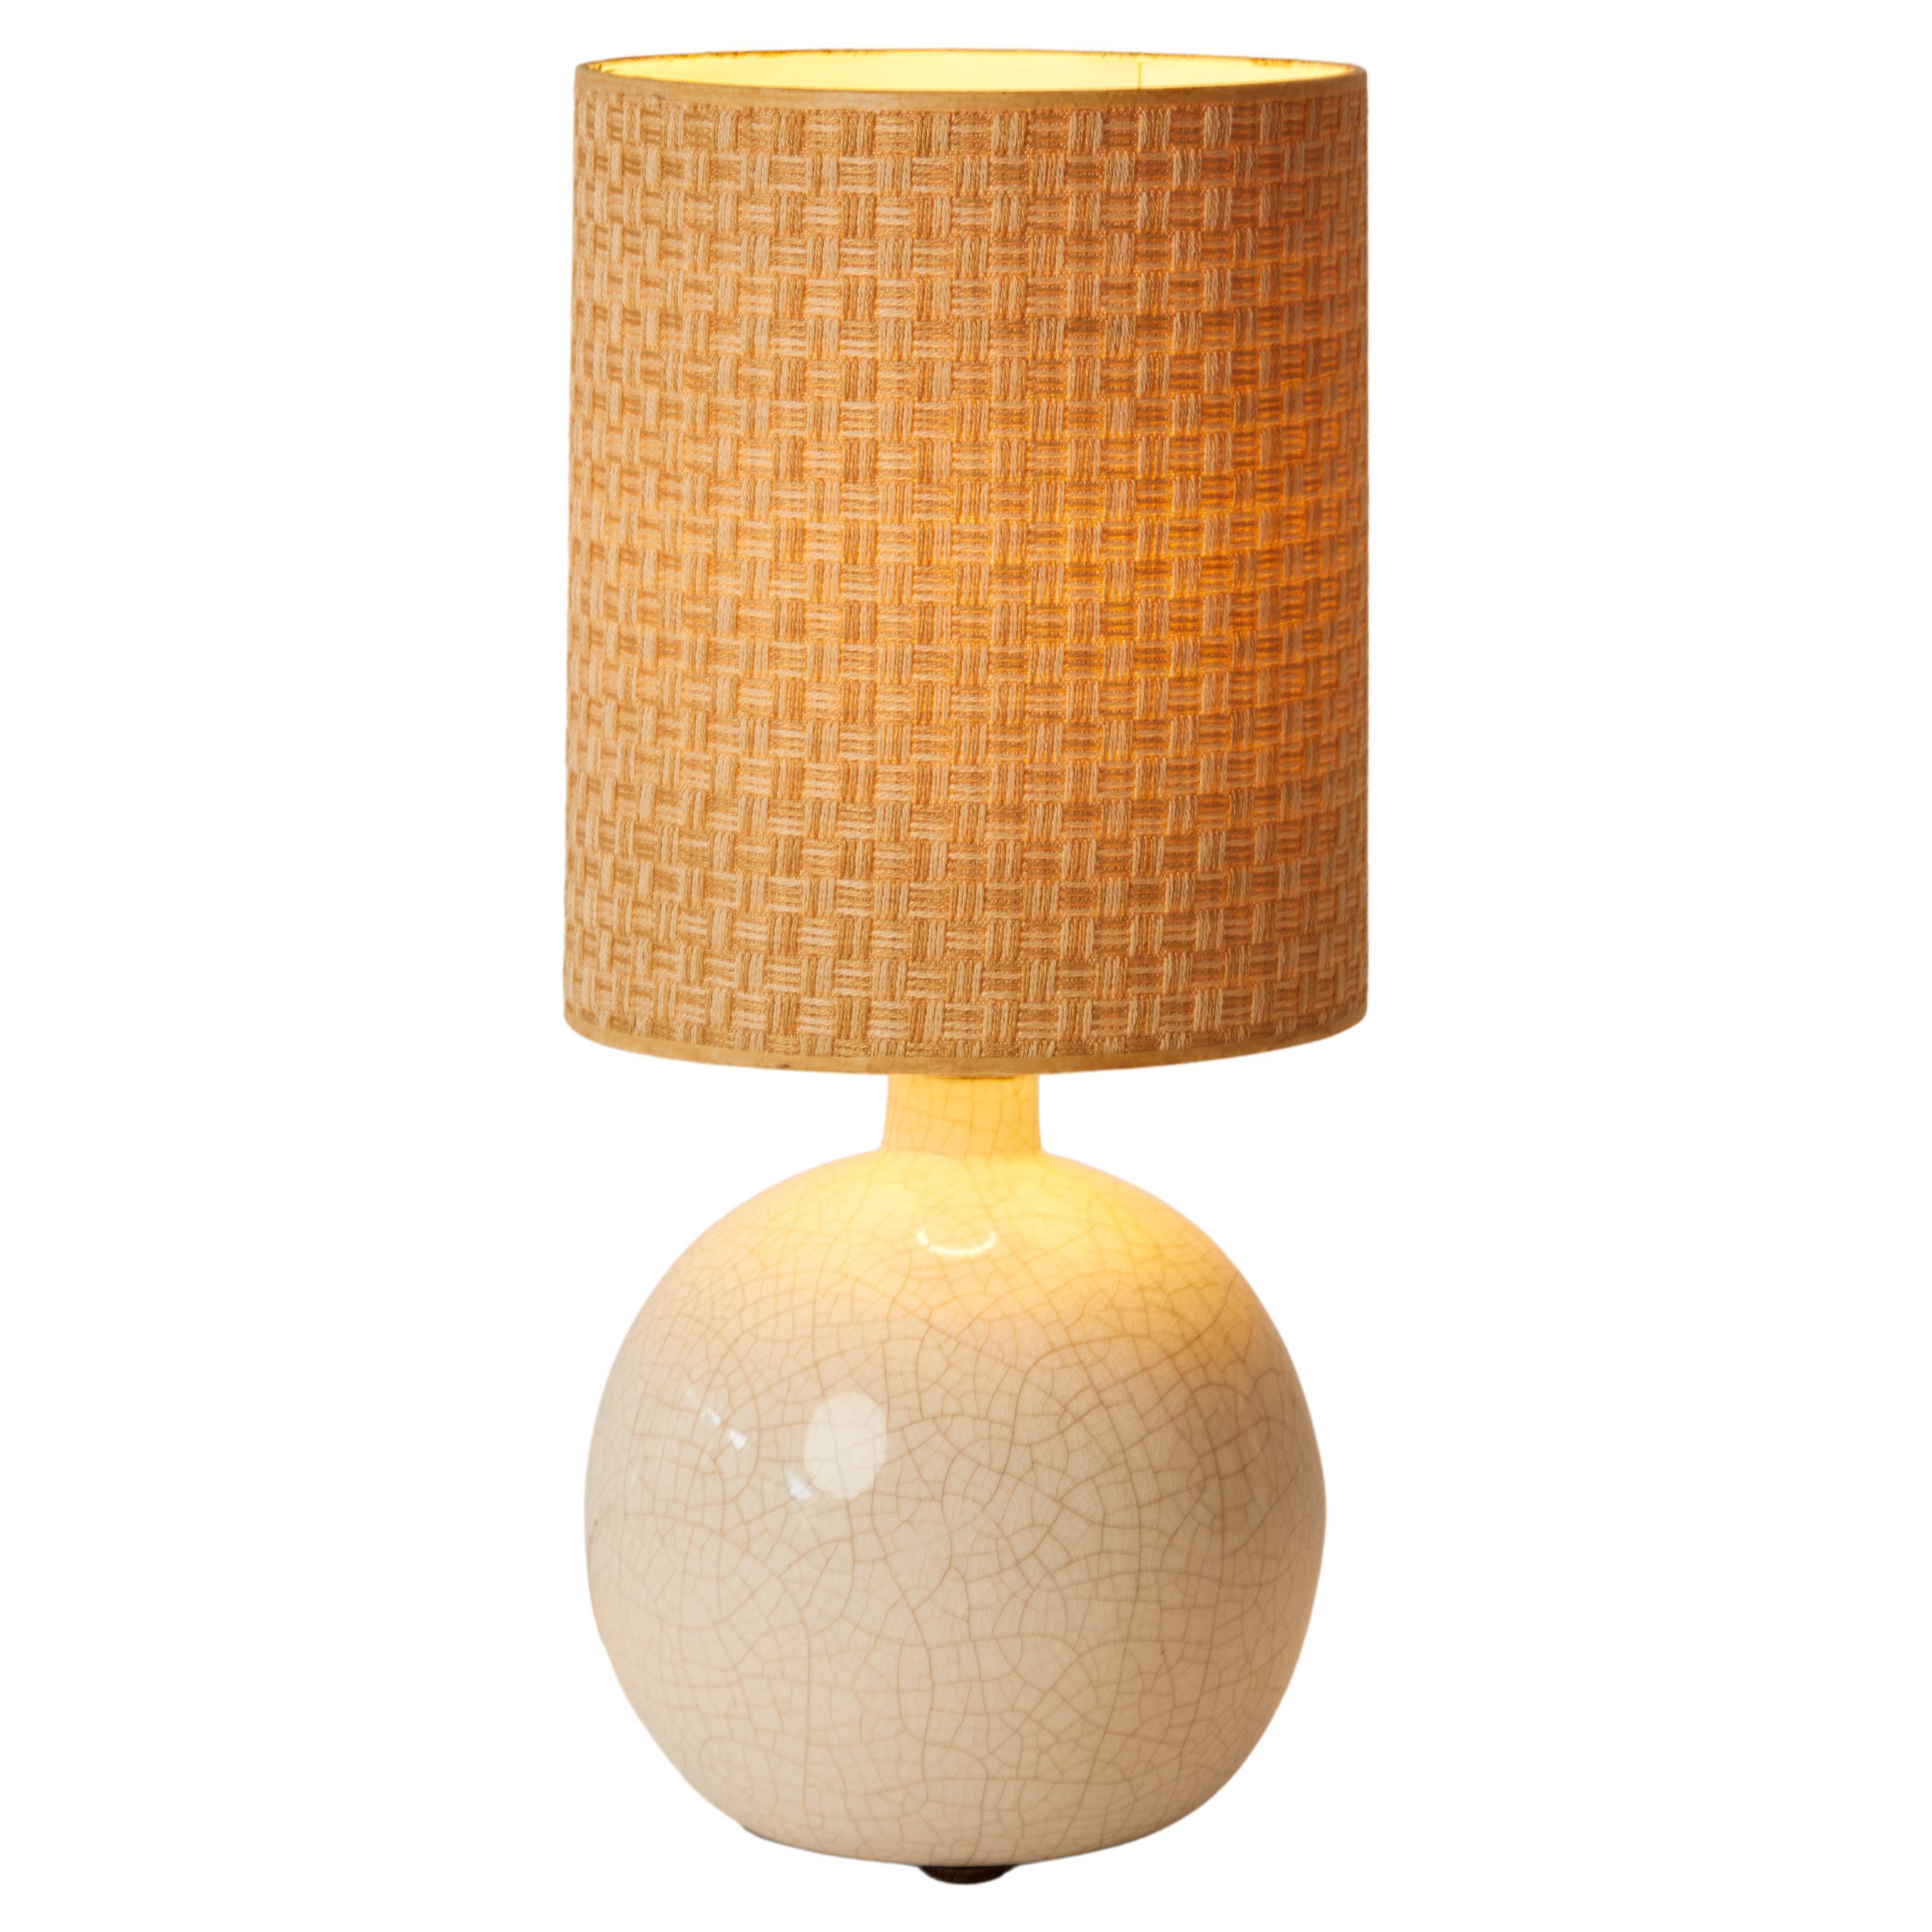 1970s Small White Crackled Table Lamp with Original Brown Woven Lampshade For Sale